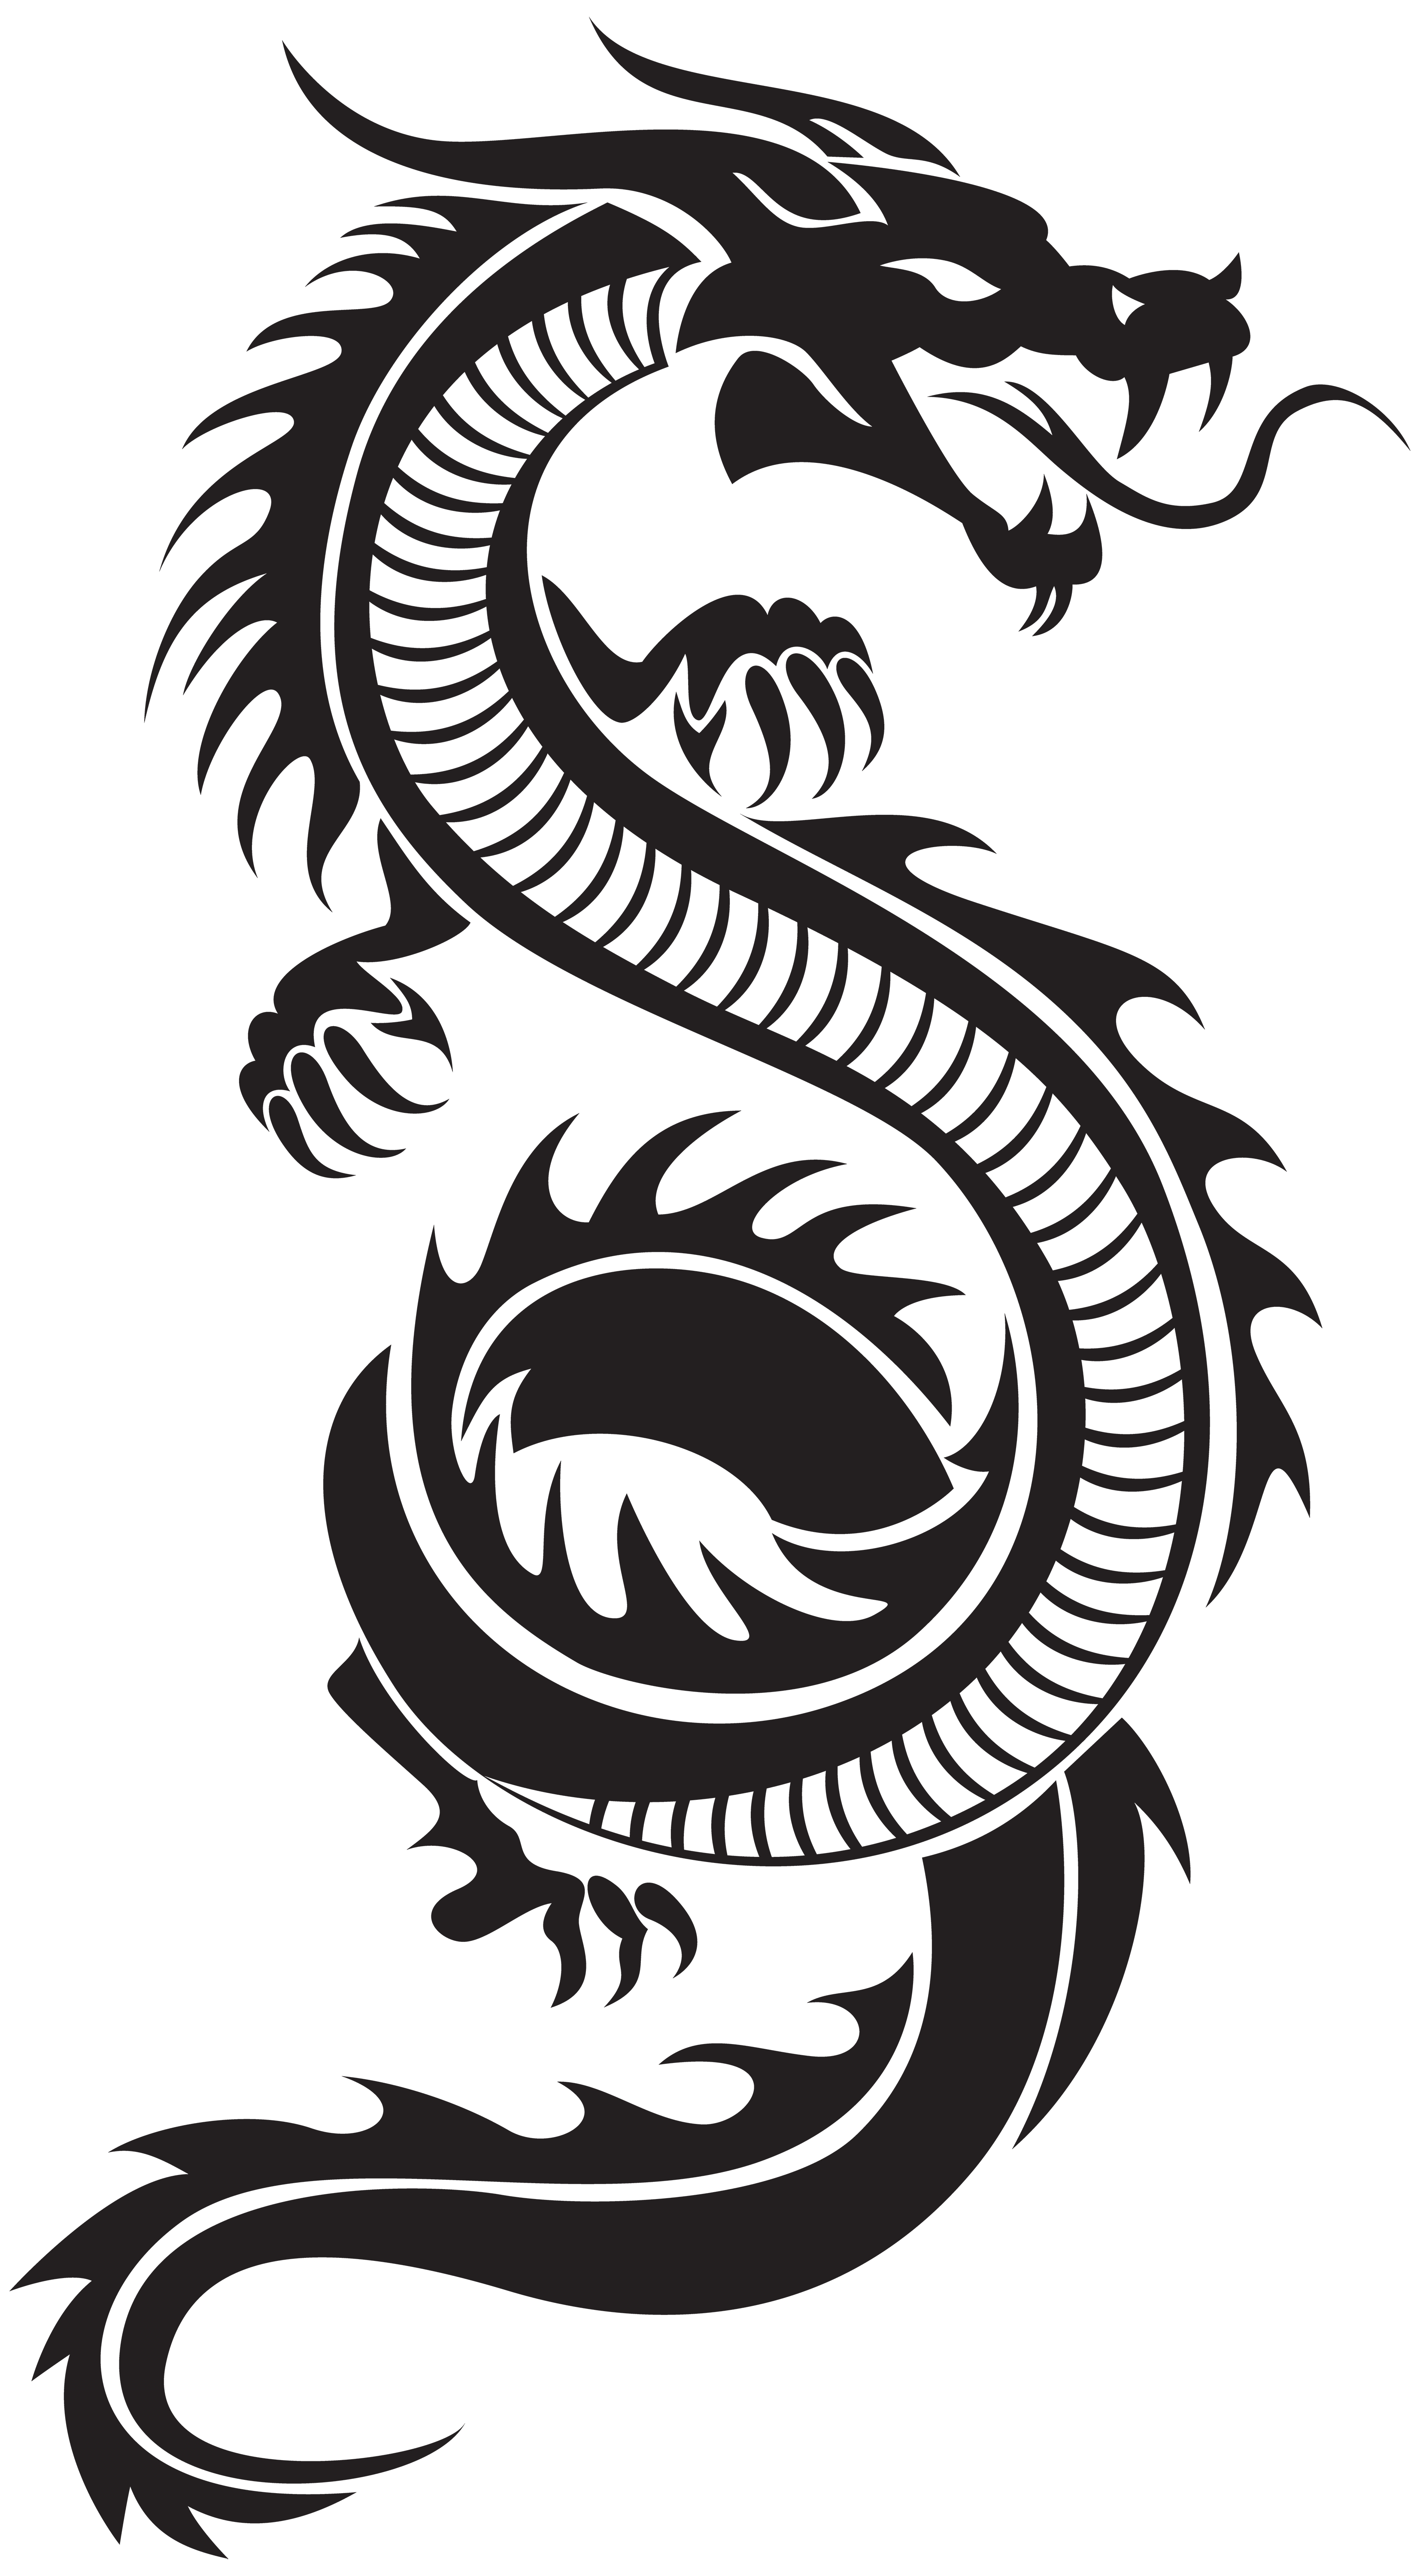 Chinese Dragon Silhouette PNG Clip Art